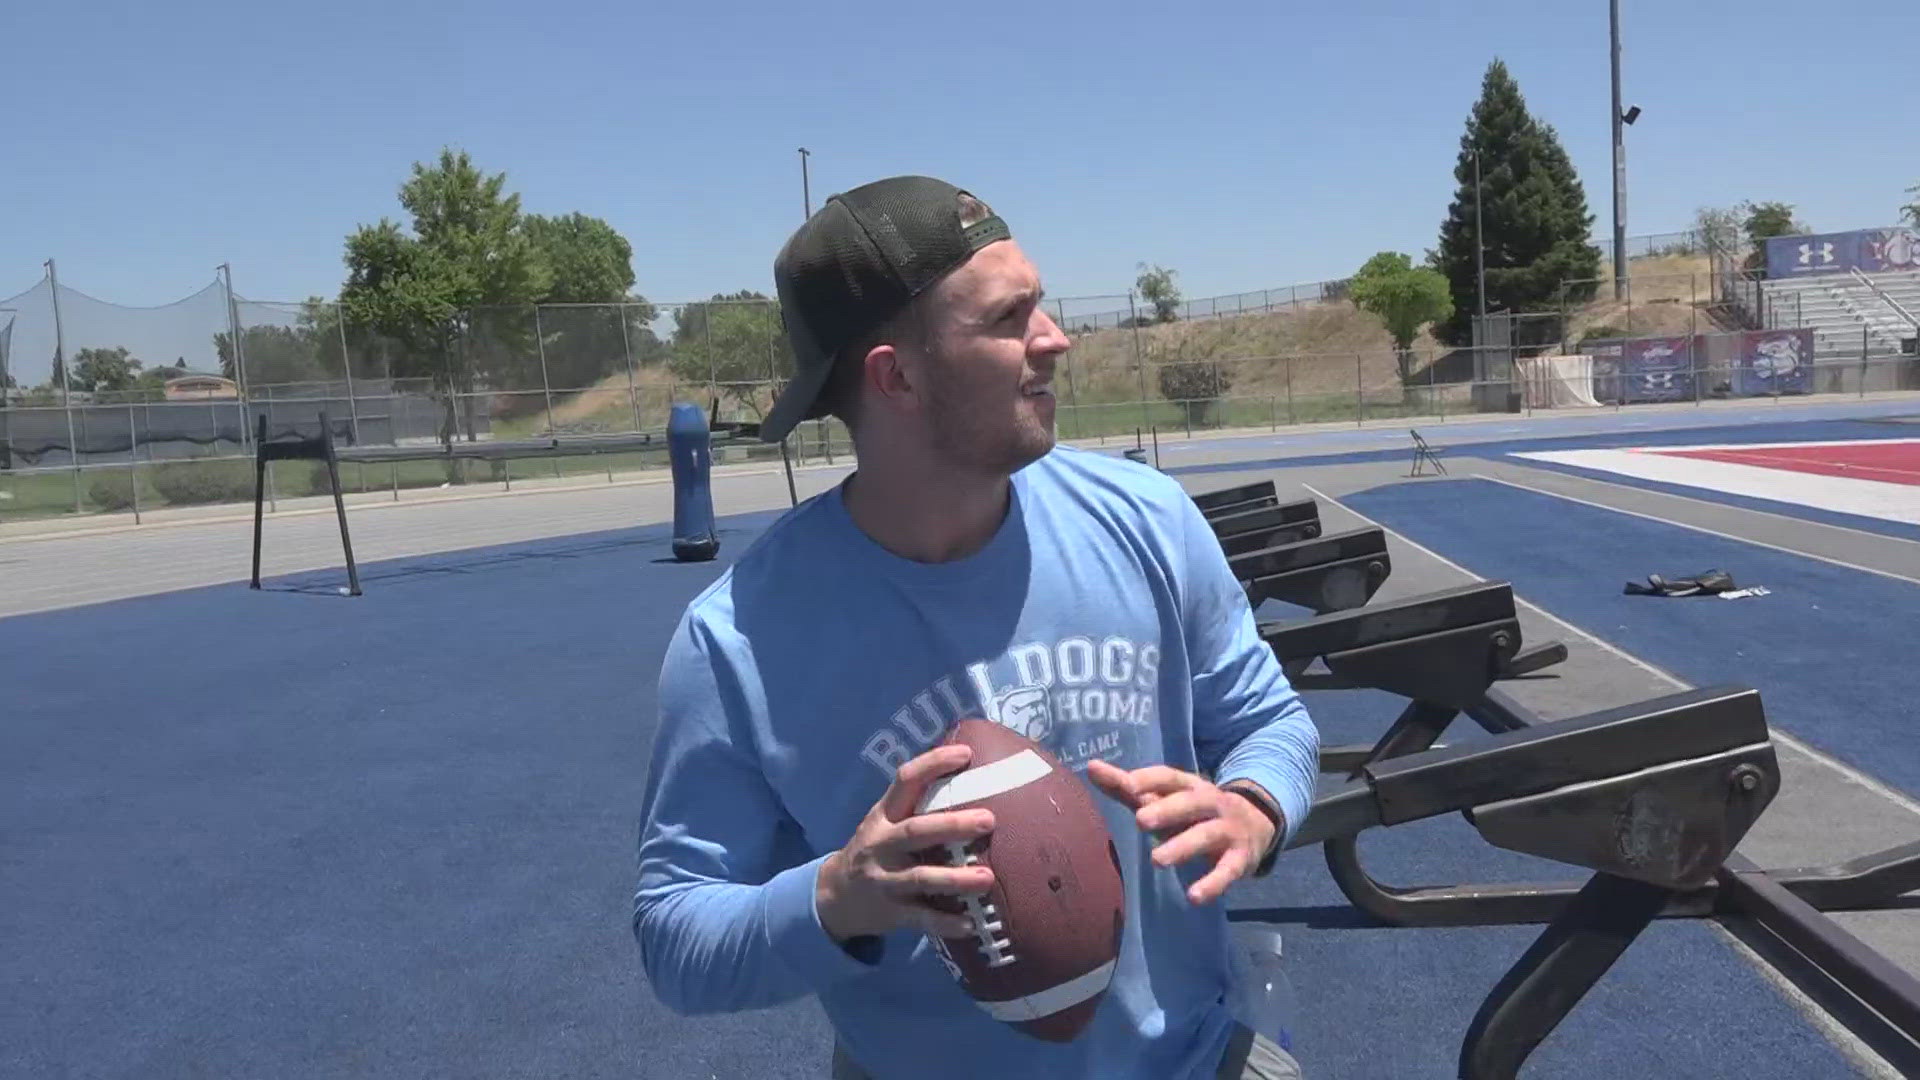 Despite the heat Saturday, Jake Browning of the Cincinnati Bengals and Jonah Williams of the Arizona Cardinals came back to Folsom High School to host a sports camp.